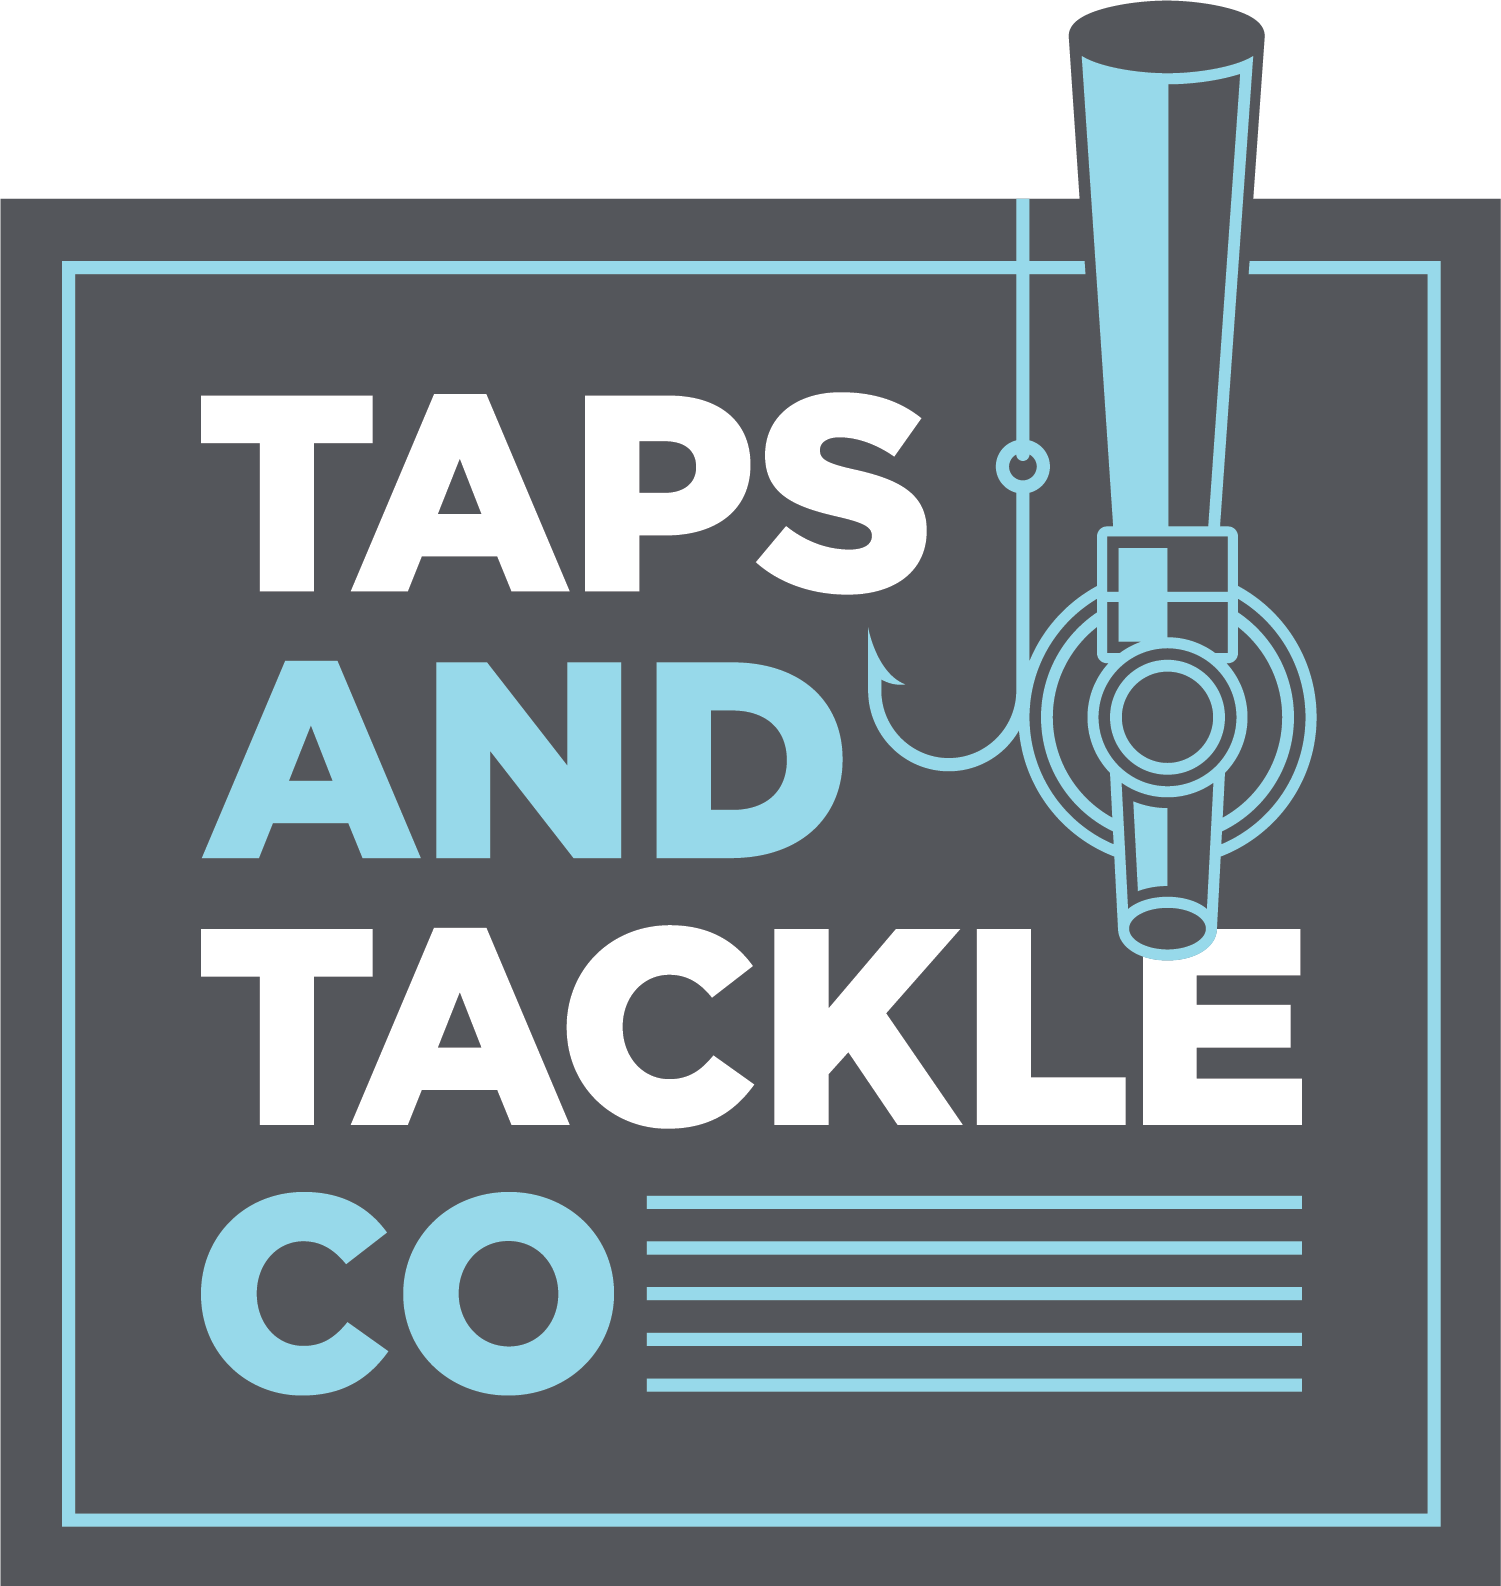 Taps and Tackle Co.